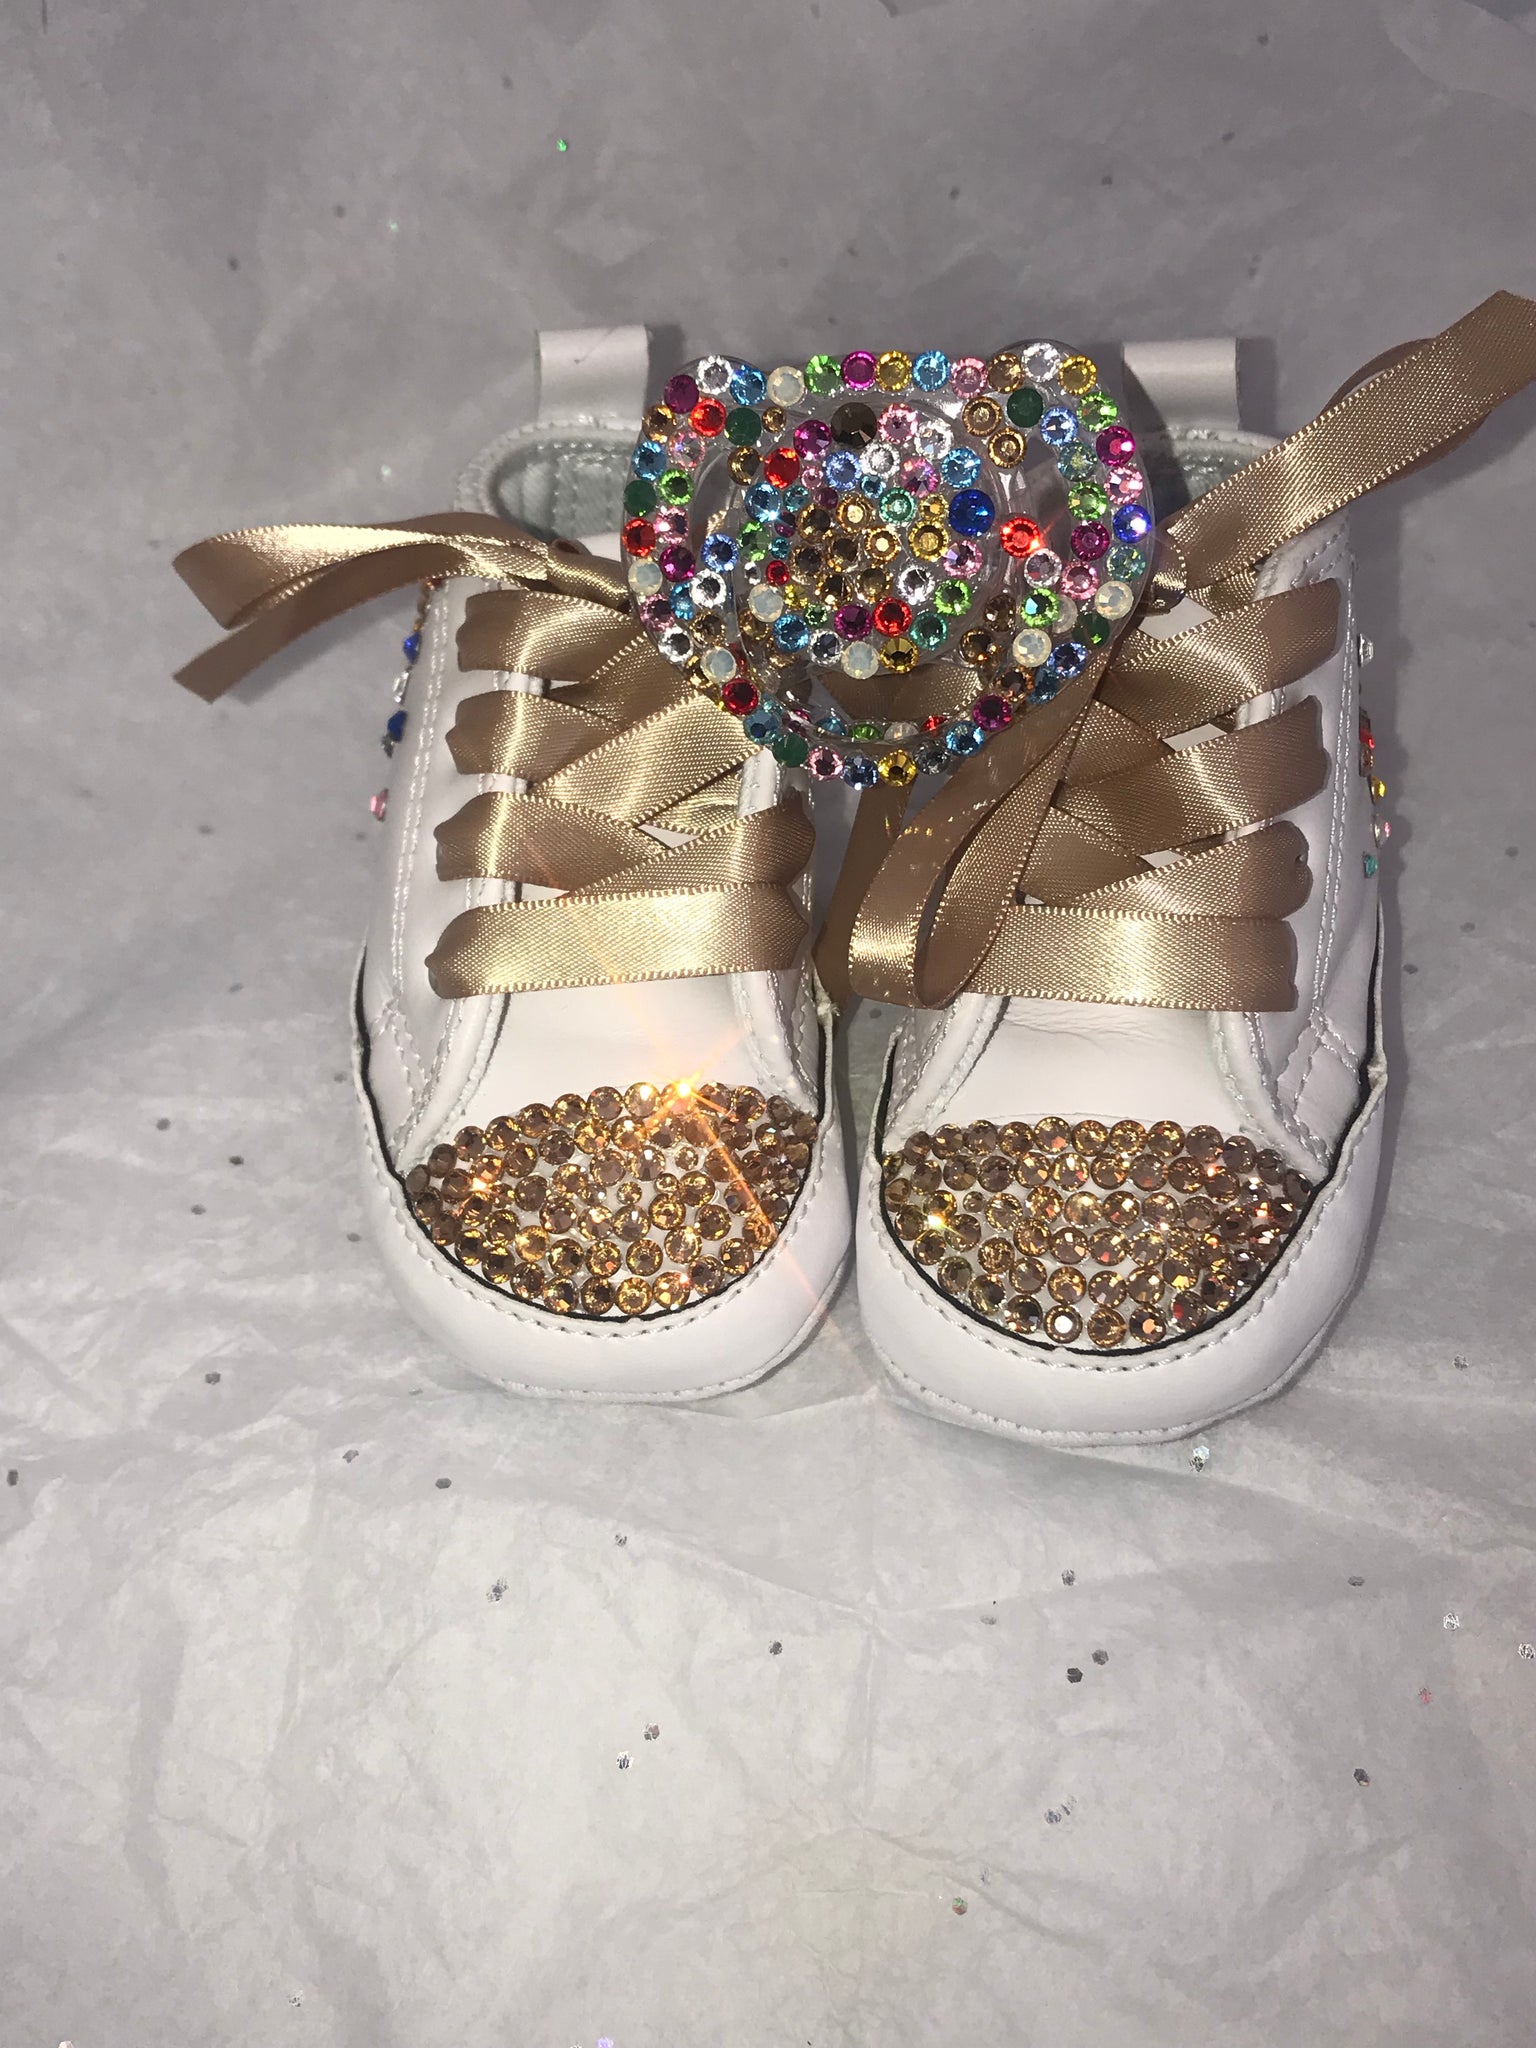 converse baby shoes bling